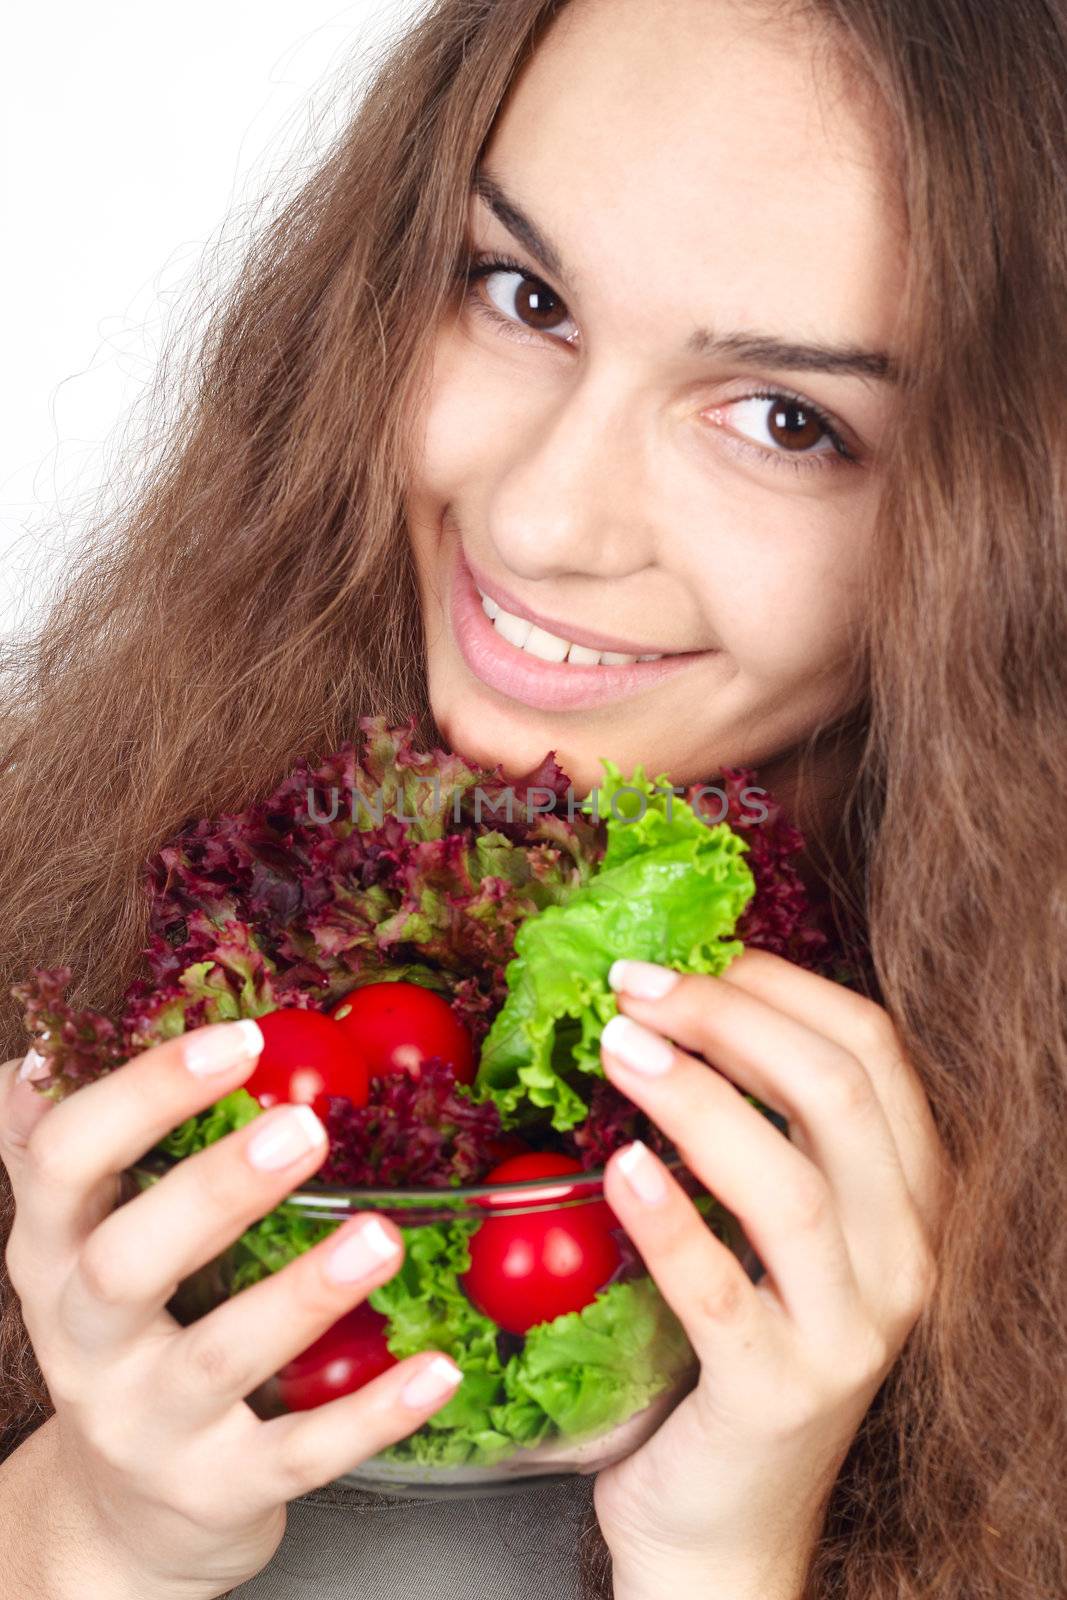 Young woman holding bowl of salad close-up portrait